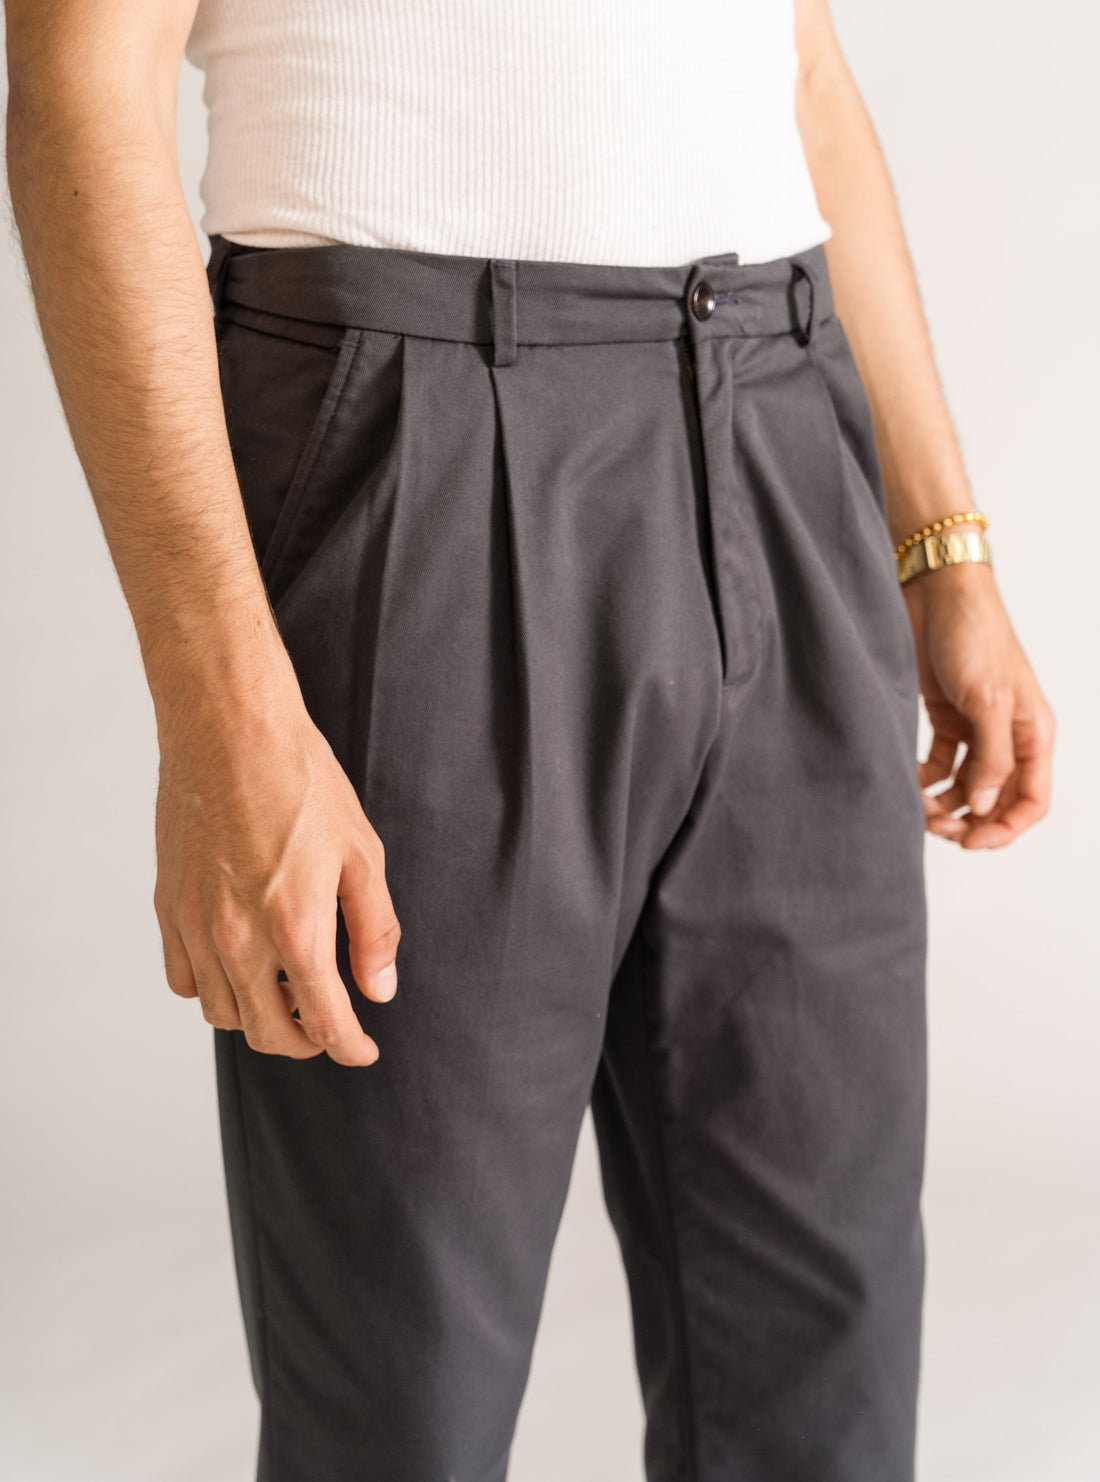 Even Better Than the Real Thing Pants, Gris Obscuro